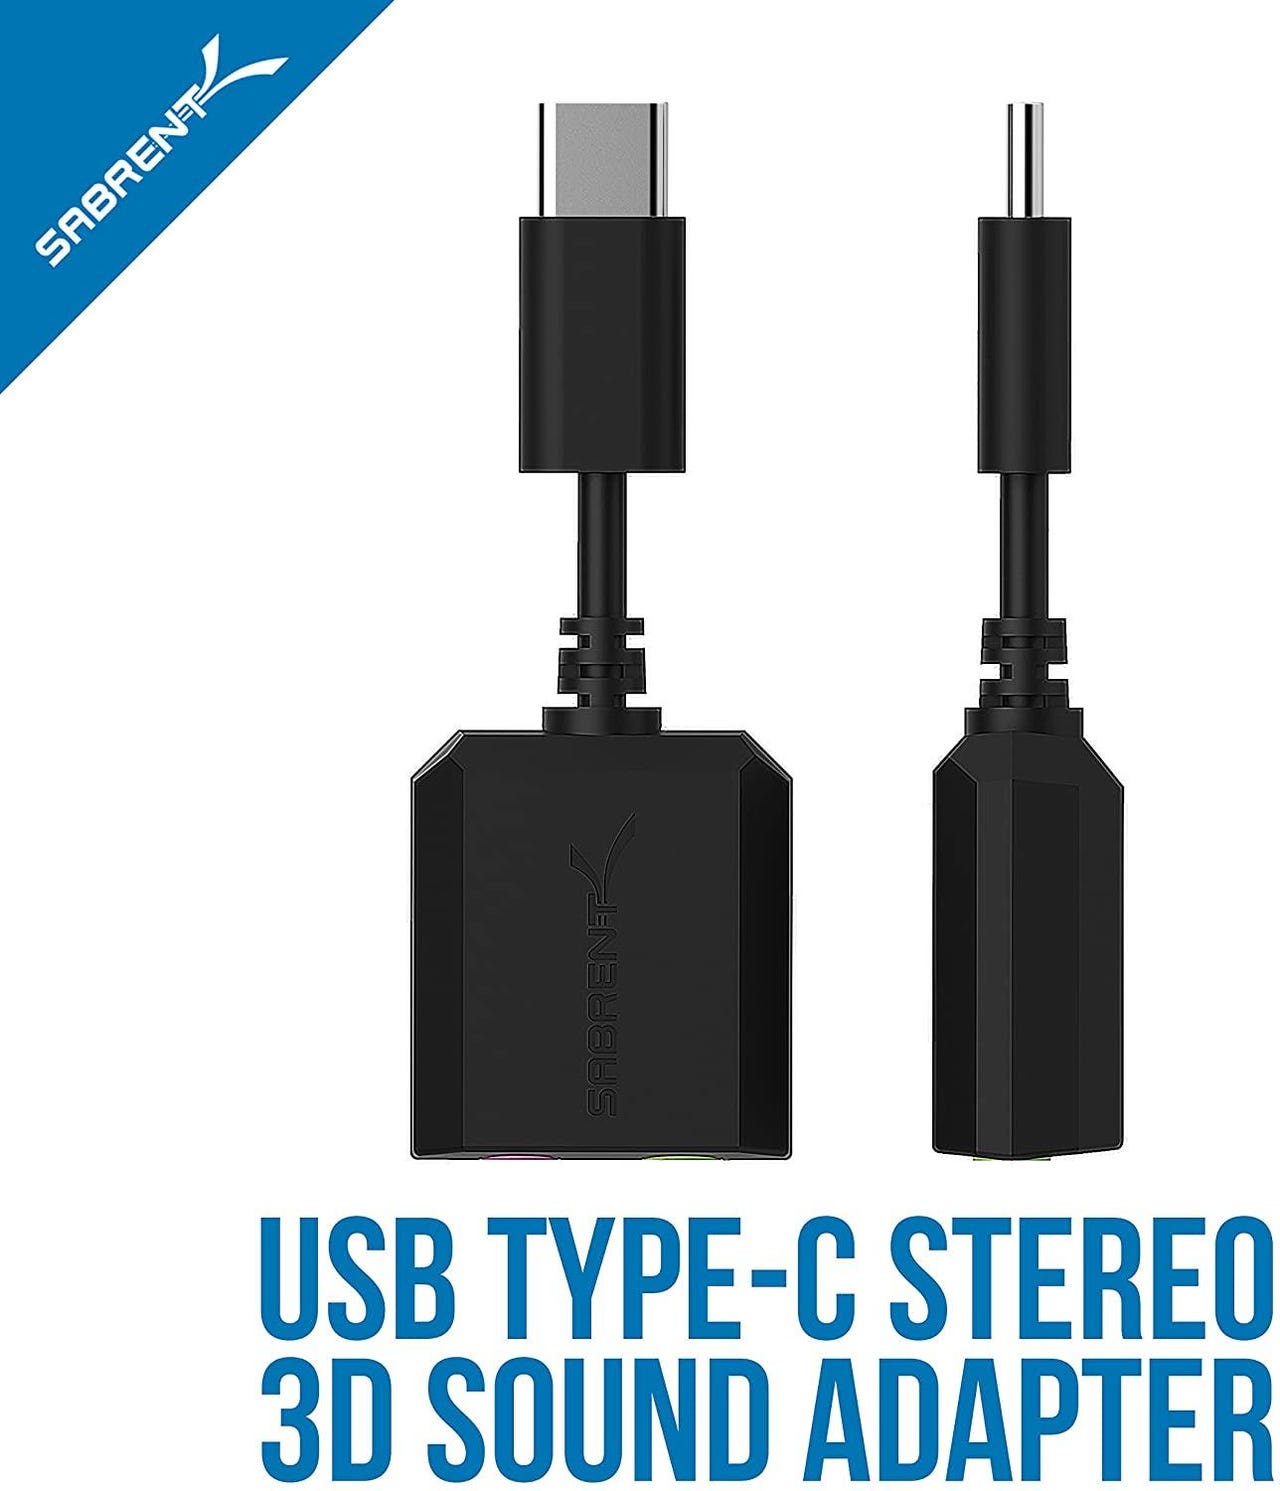 Sabrent USB-C External Stereo Sound Adapter